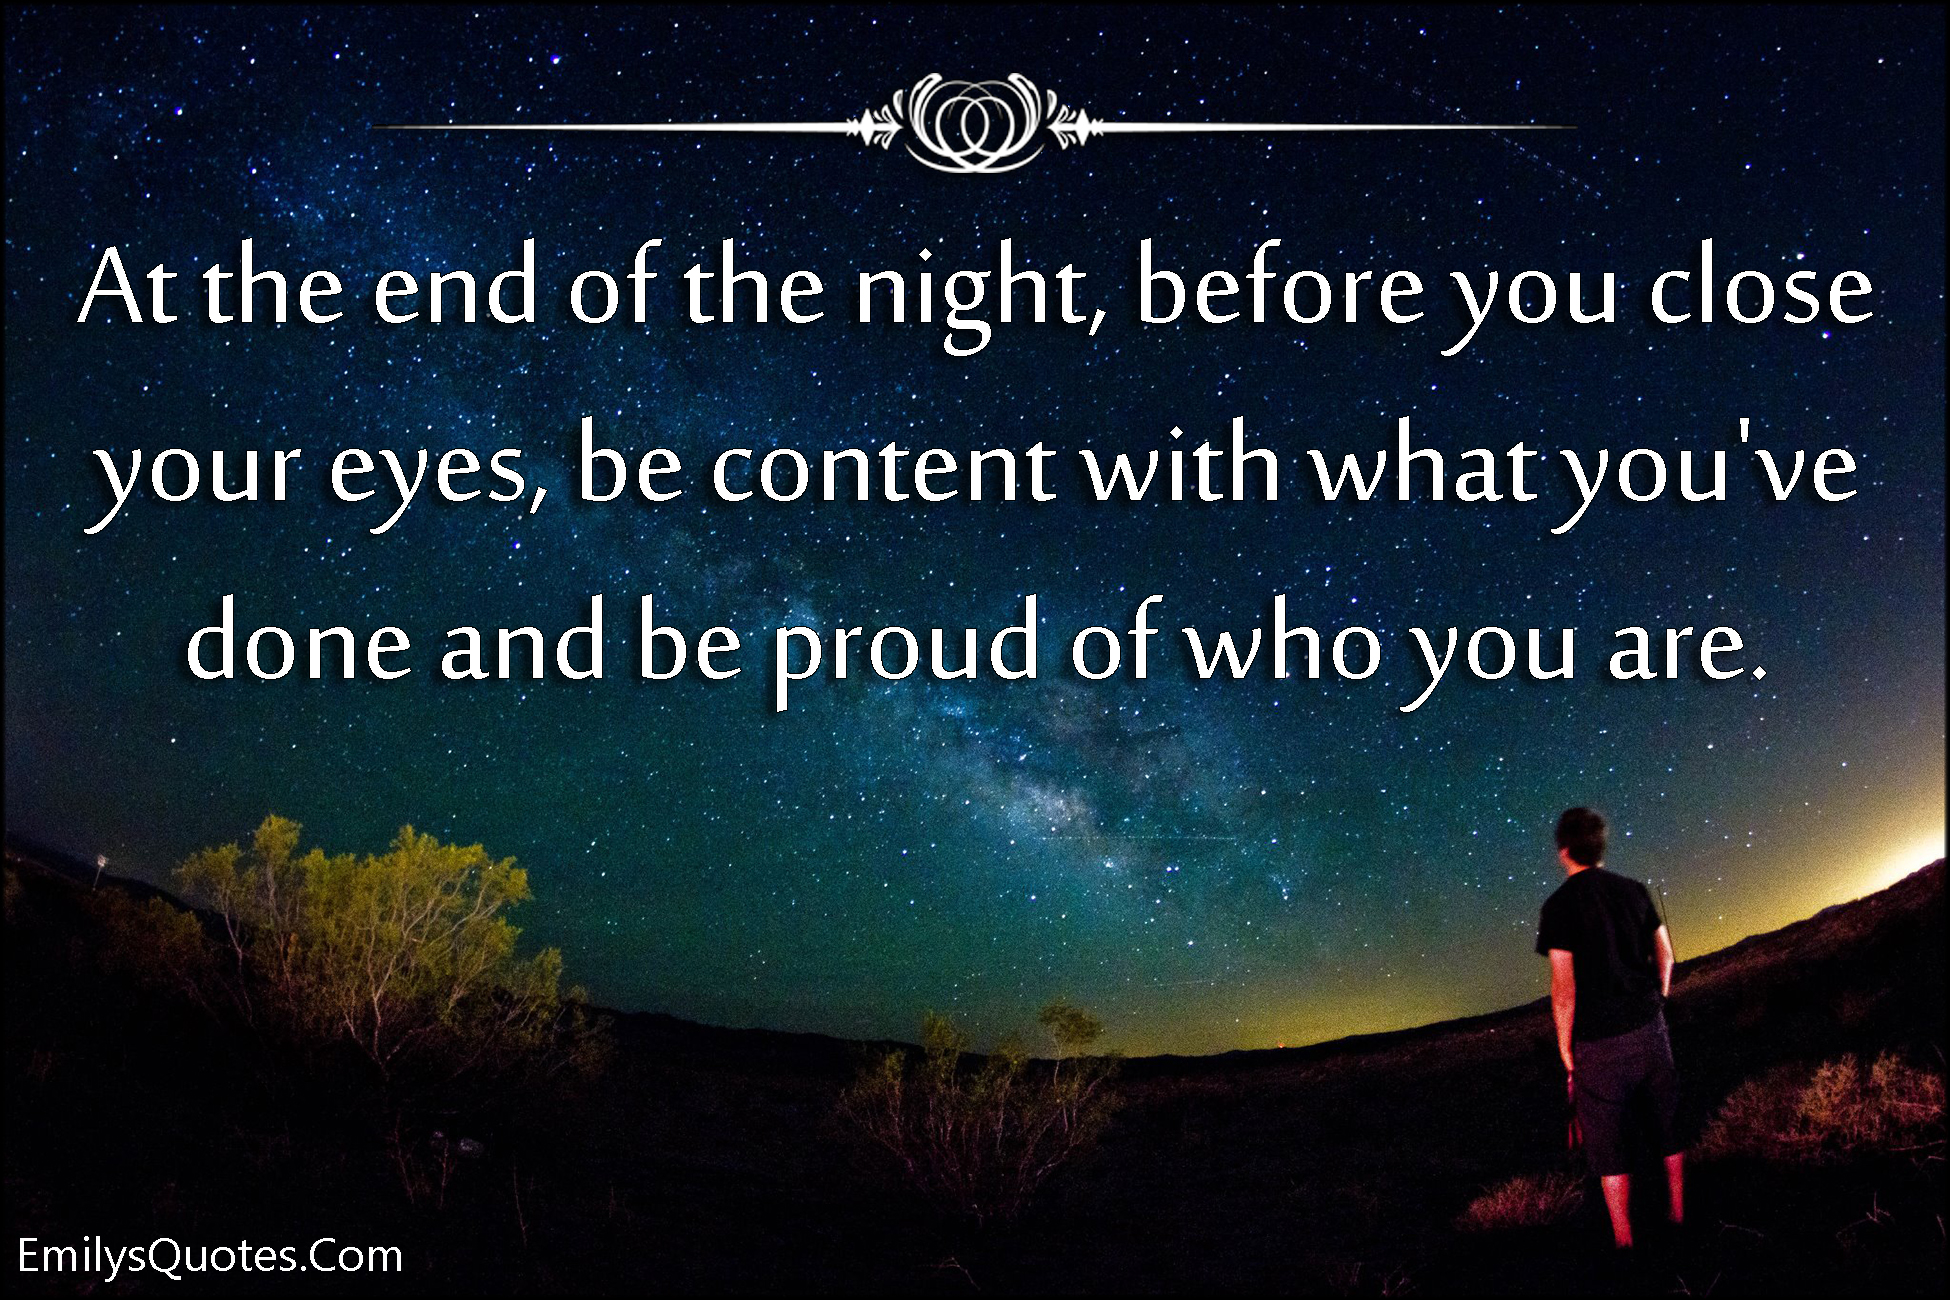 At the end of the night, before you close your eyes, be content with what you’ve done and be proud of who you are